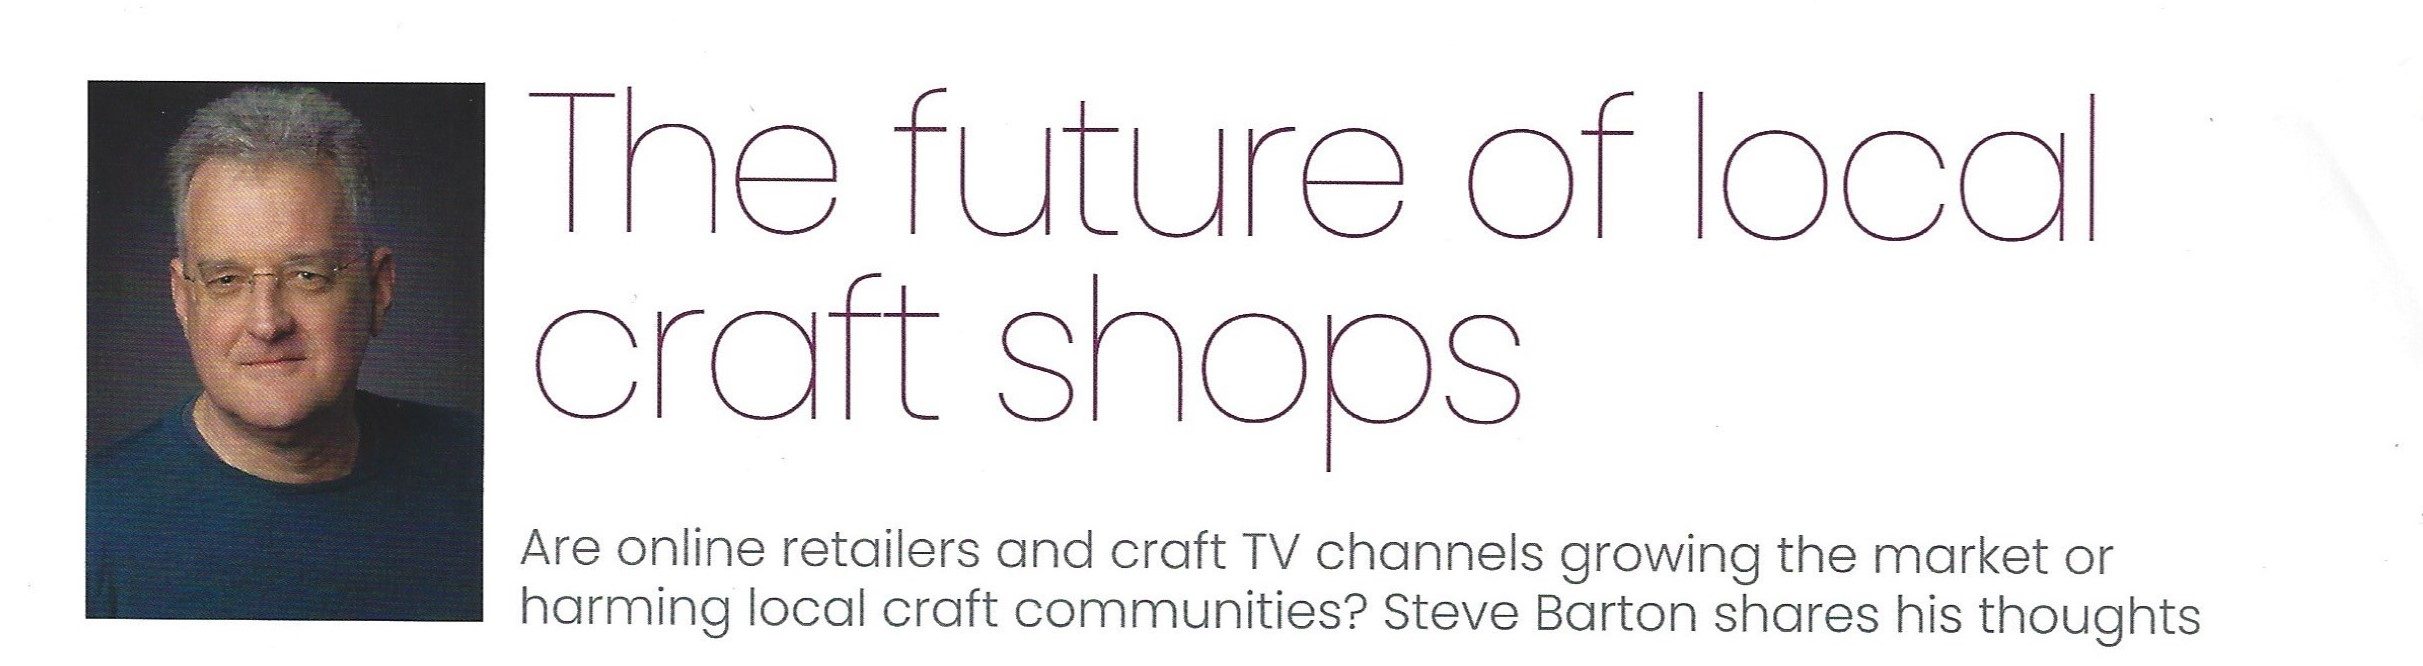 Article on shops and community from CRAFT FOCUS